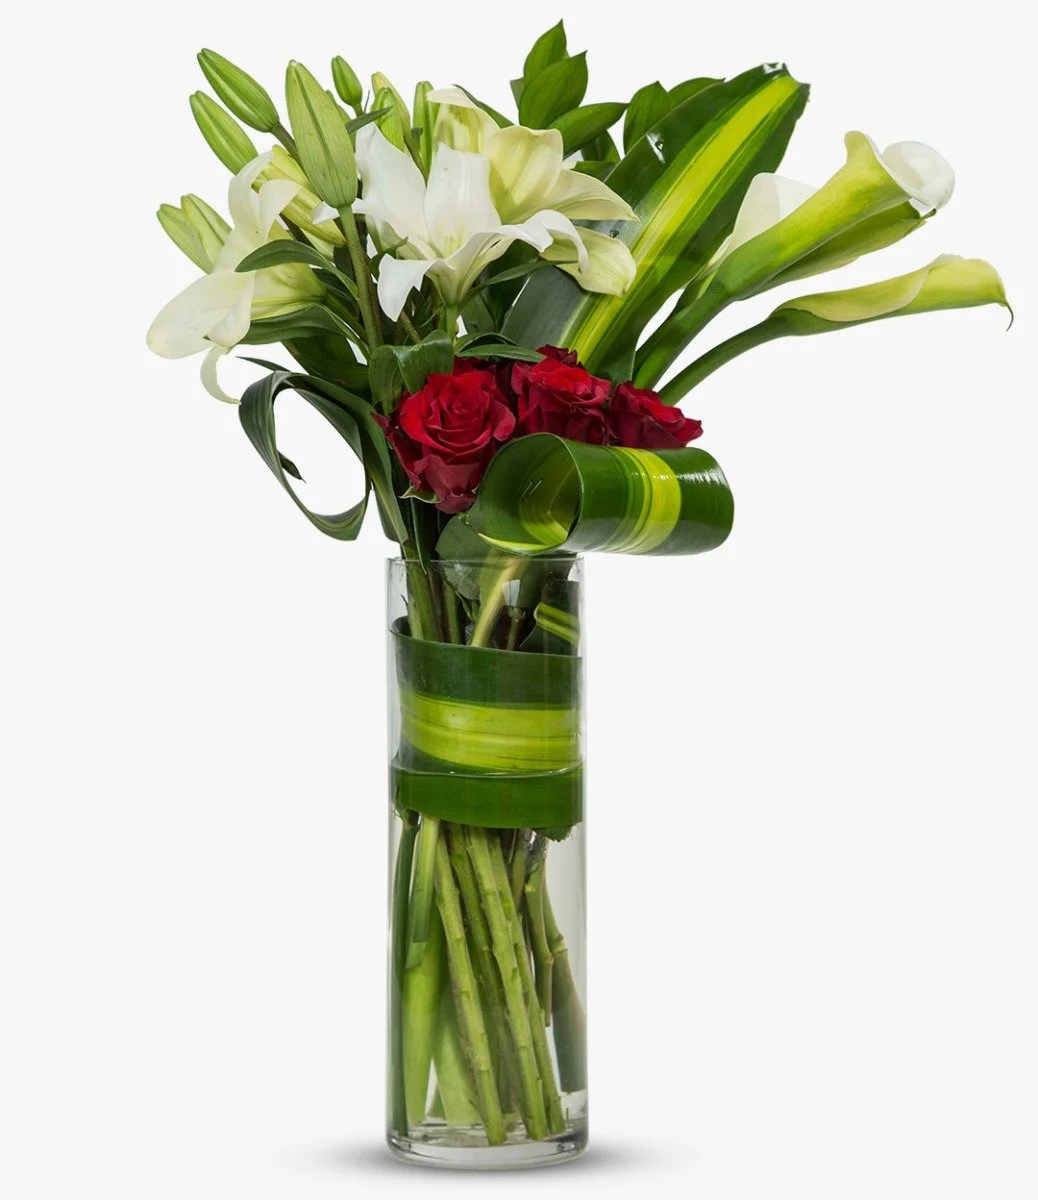 Red Rose and White Lily Arrangement